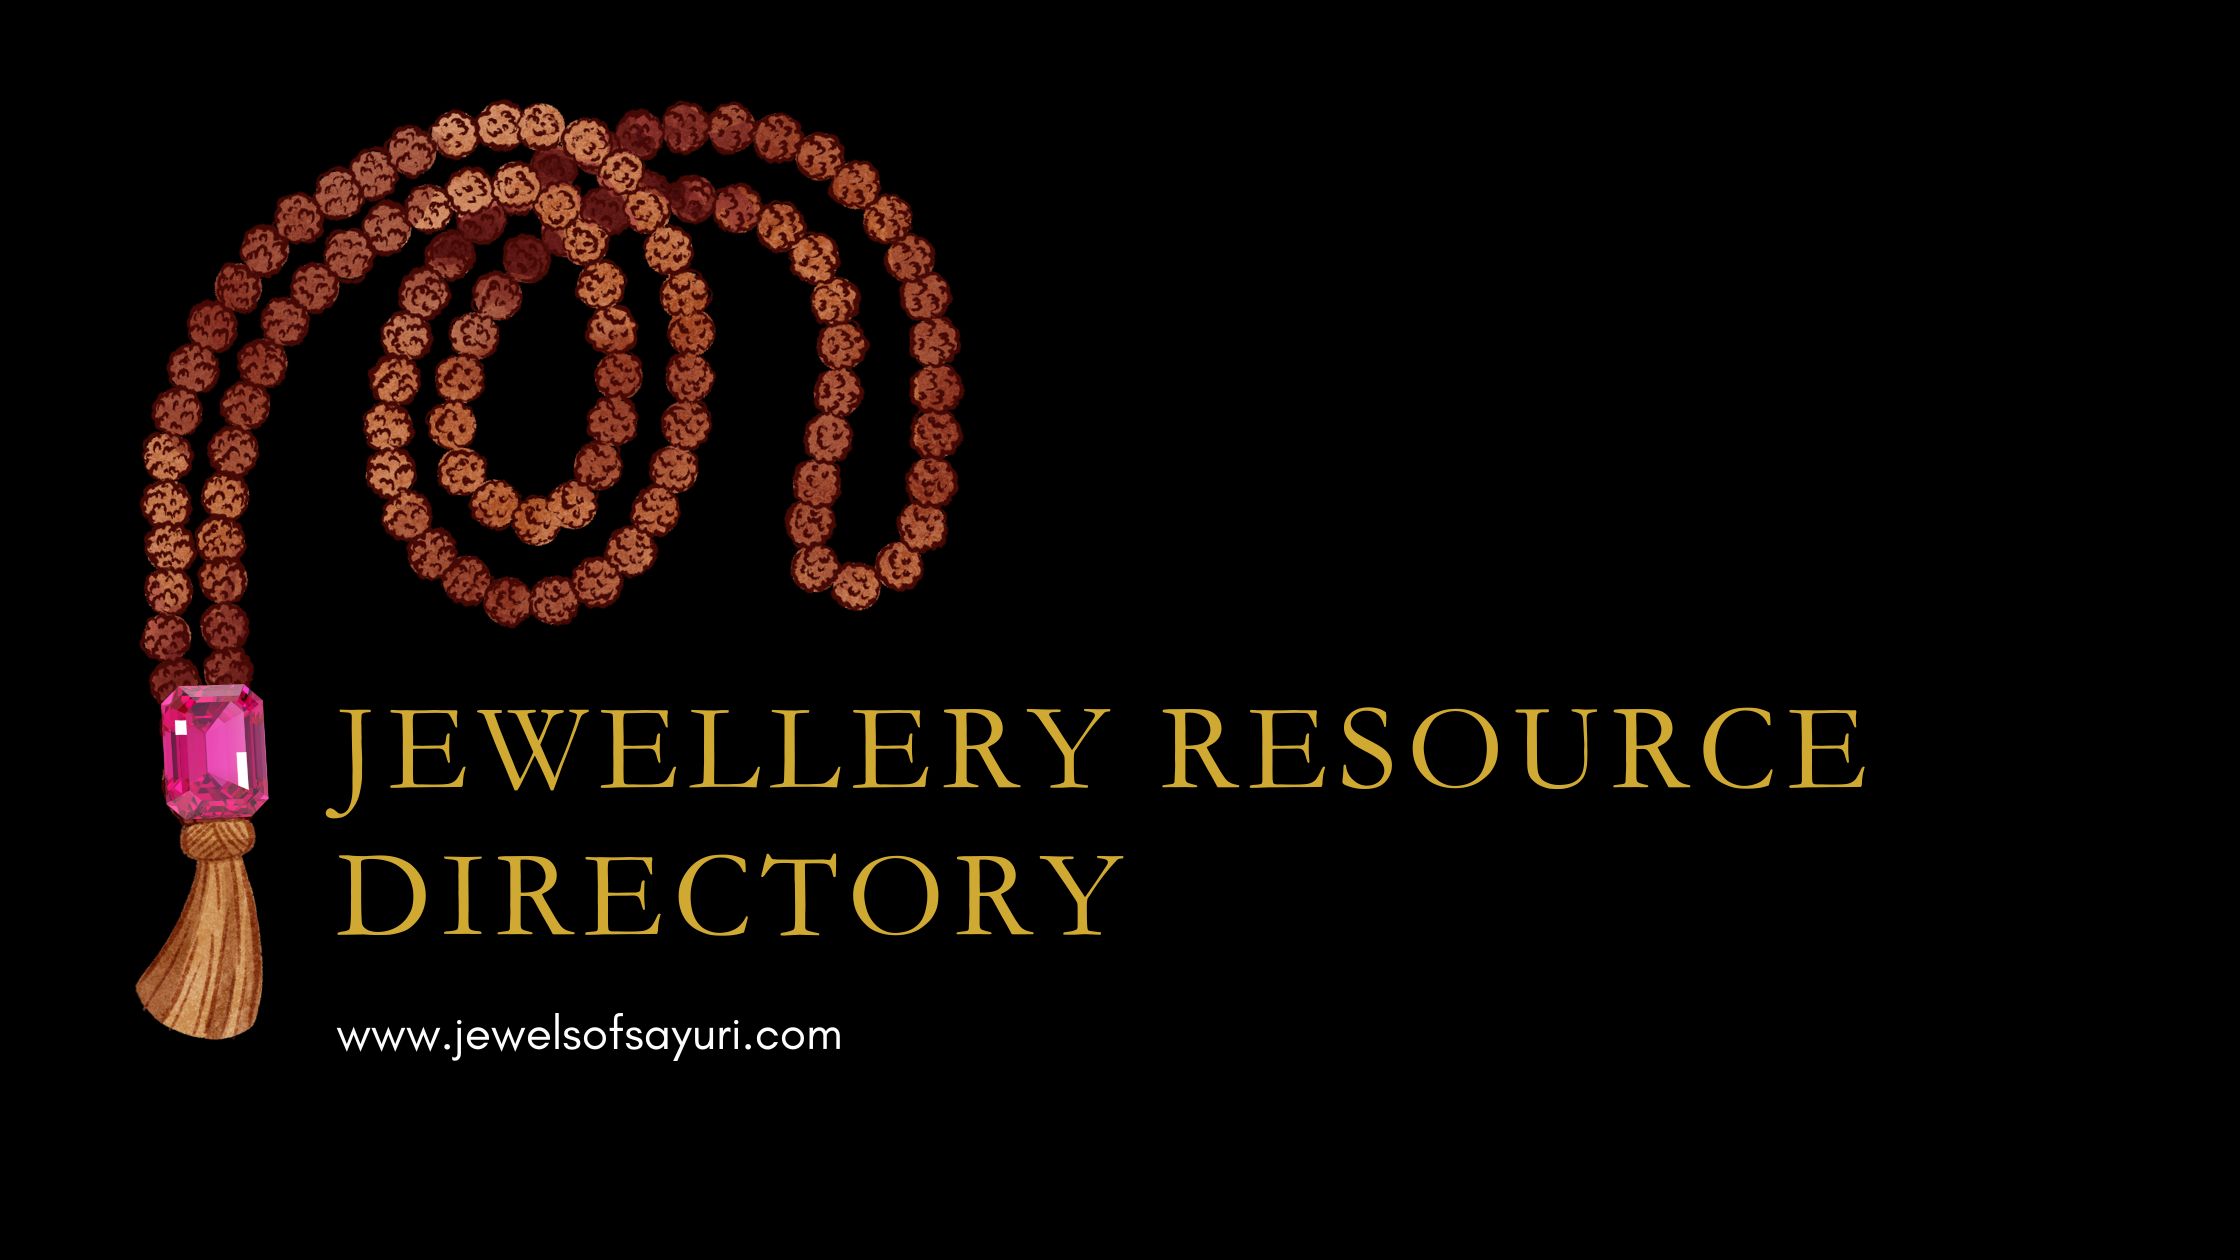 Jewellery resource directory for you